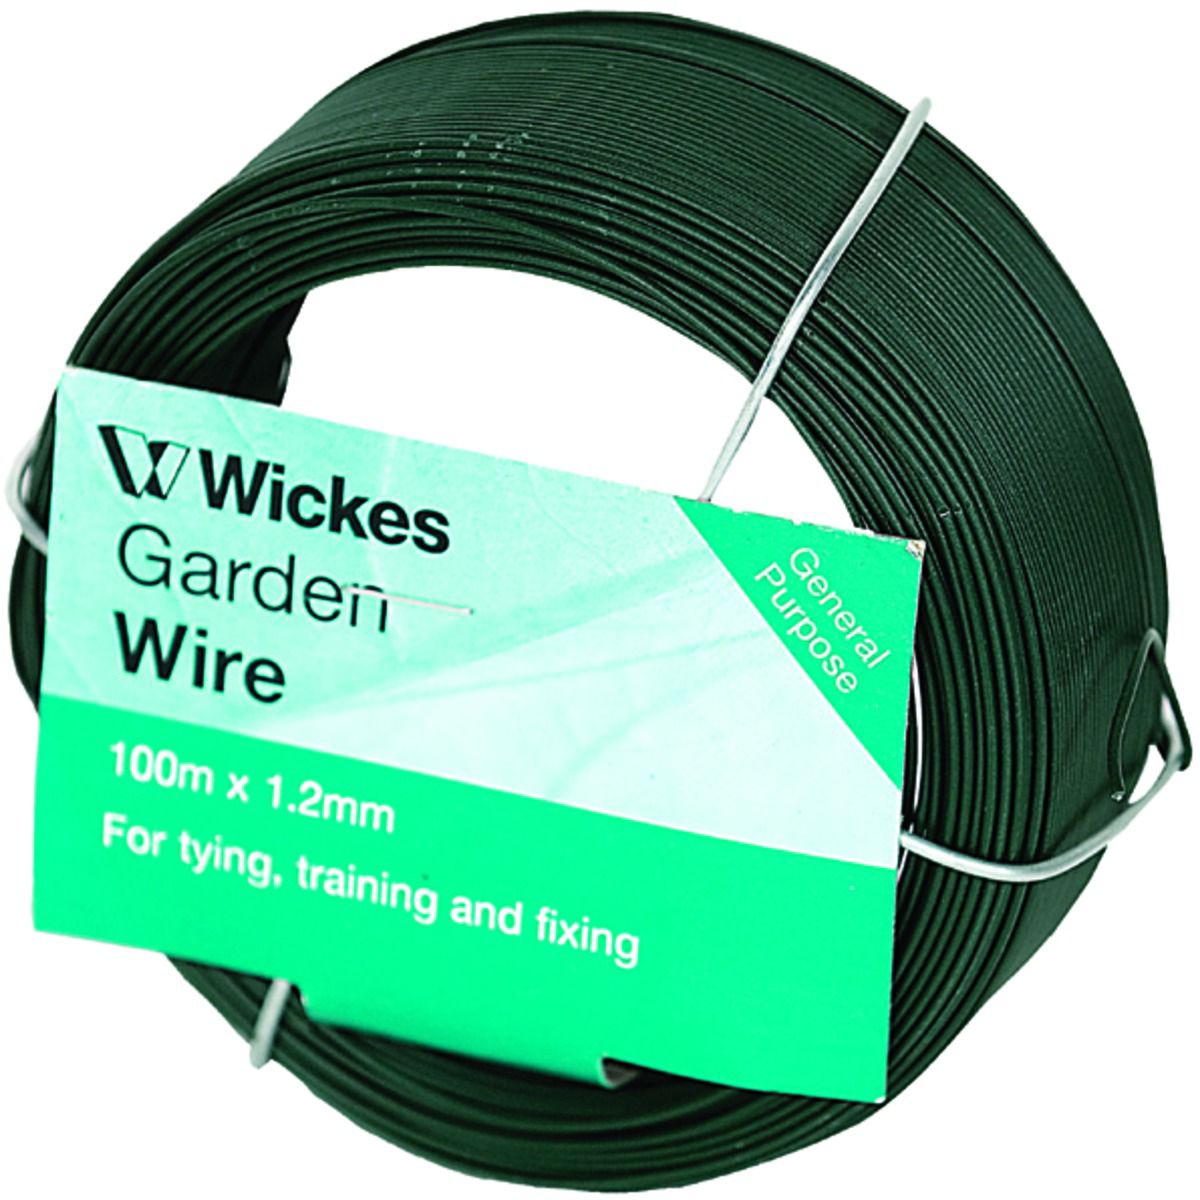 Image of Wickes PVC Coated Garden Wire - 1.2mm x 100m